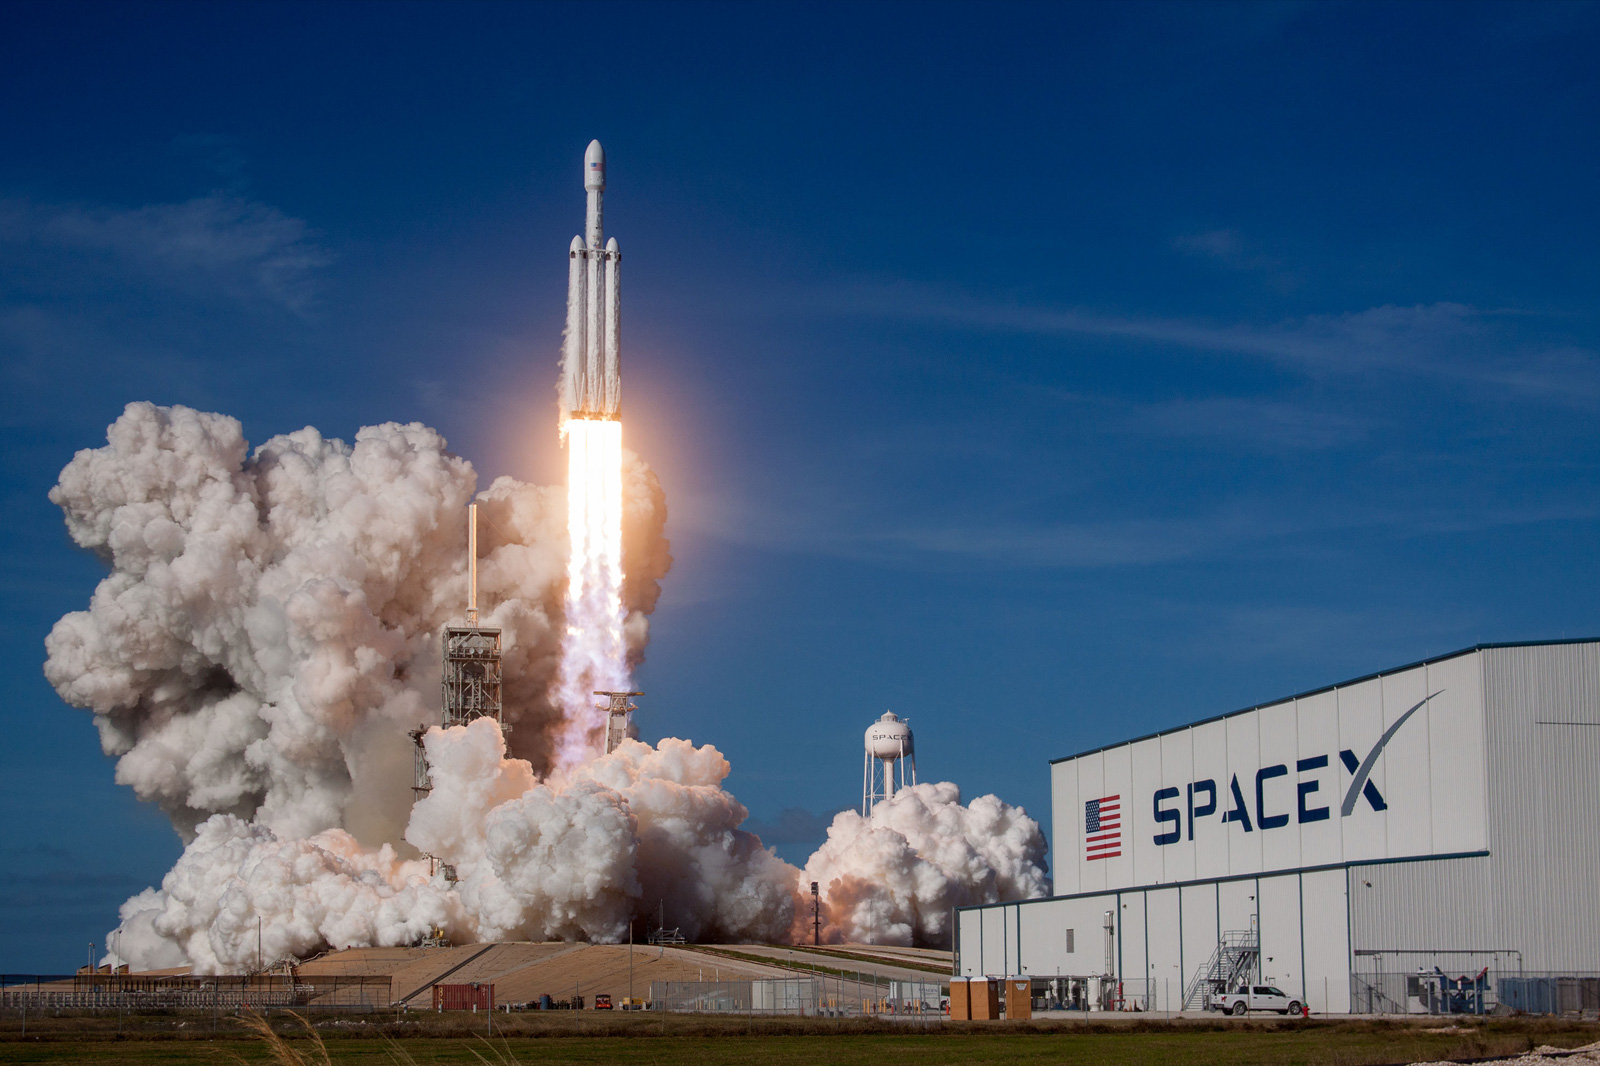 Lockbit hackers steal 3,000 unique SpaceX blueprints and promise to release if not ransomed